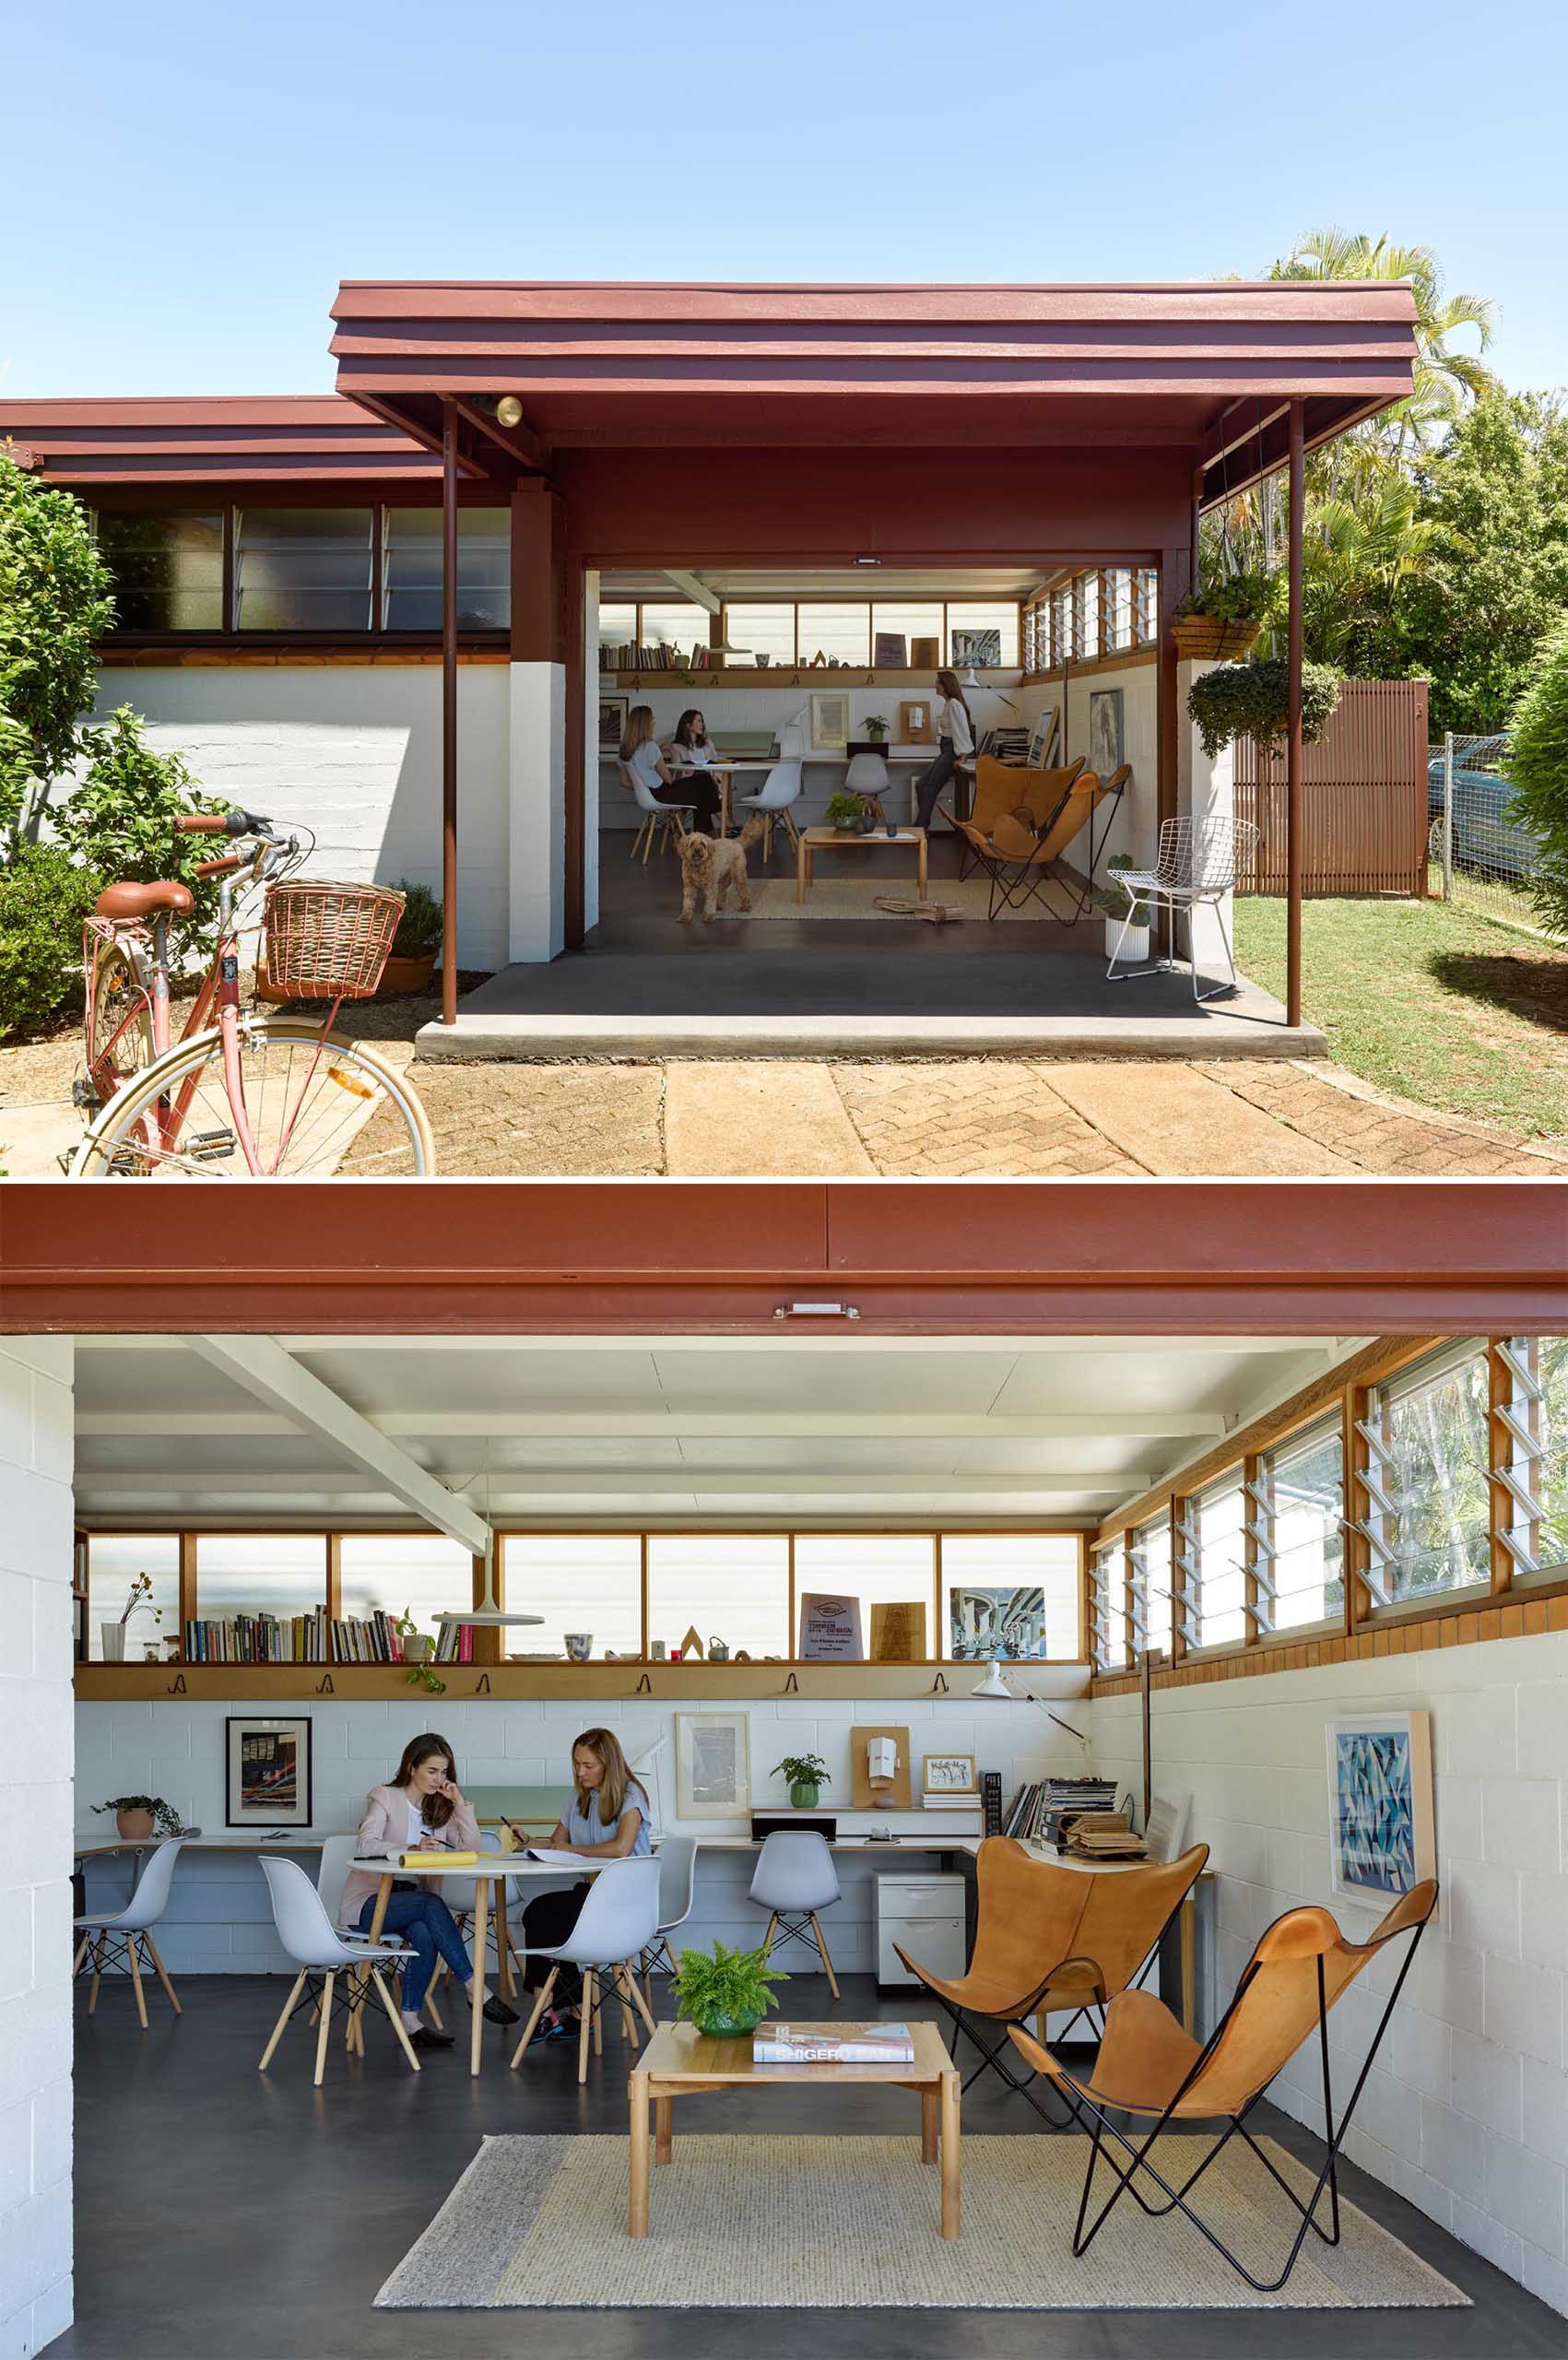 A converted carport acts as an office for 4-5 people, and can be transformed into a secondary suite if needed one day.